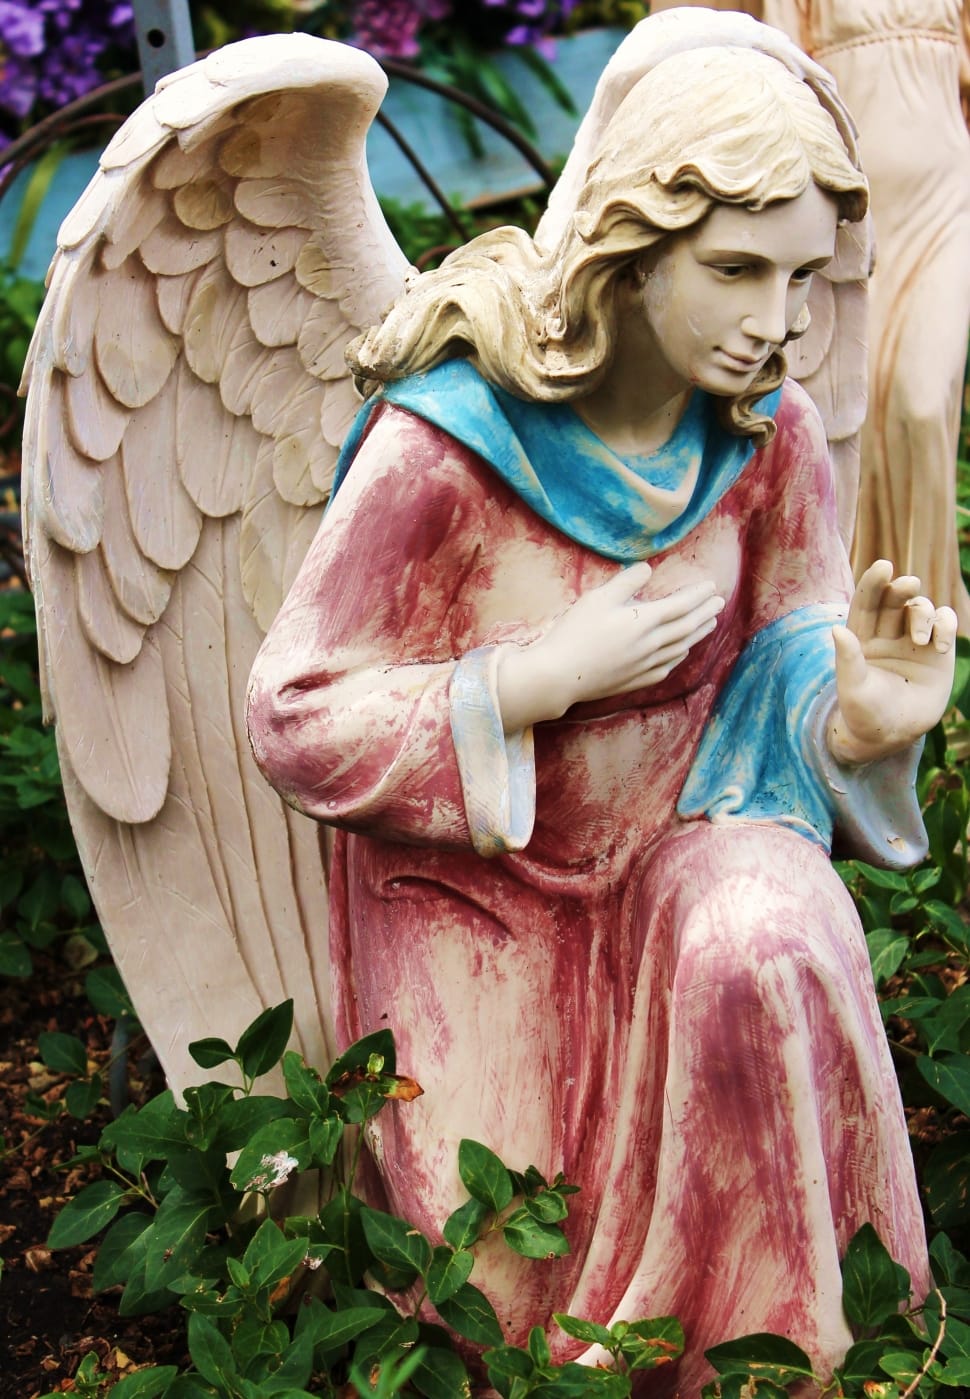 Angel, Statue, Yard Art, Religion, close-up, outdoors preview